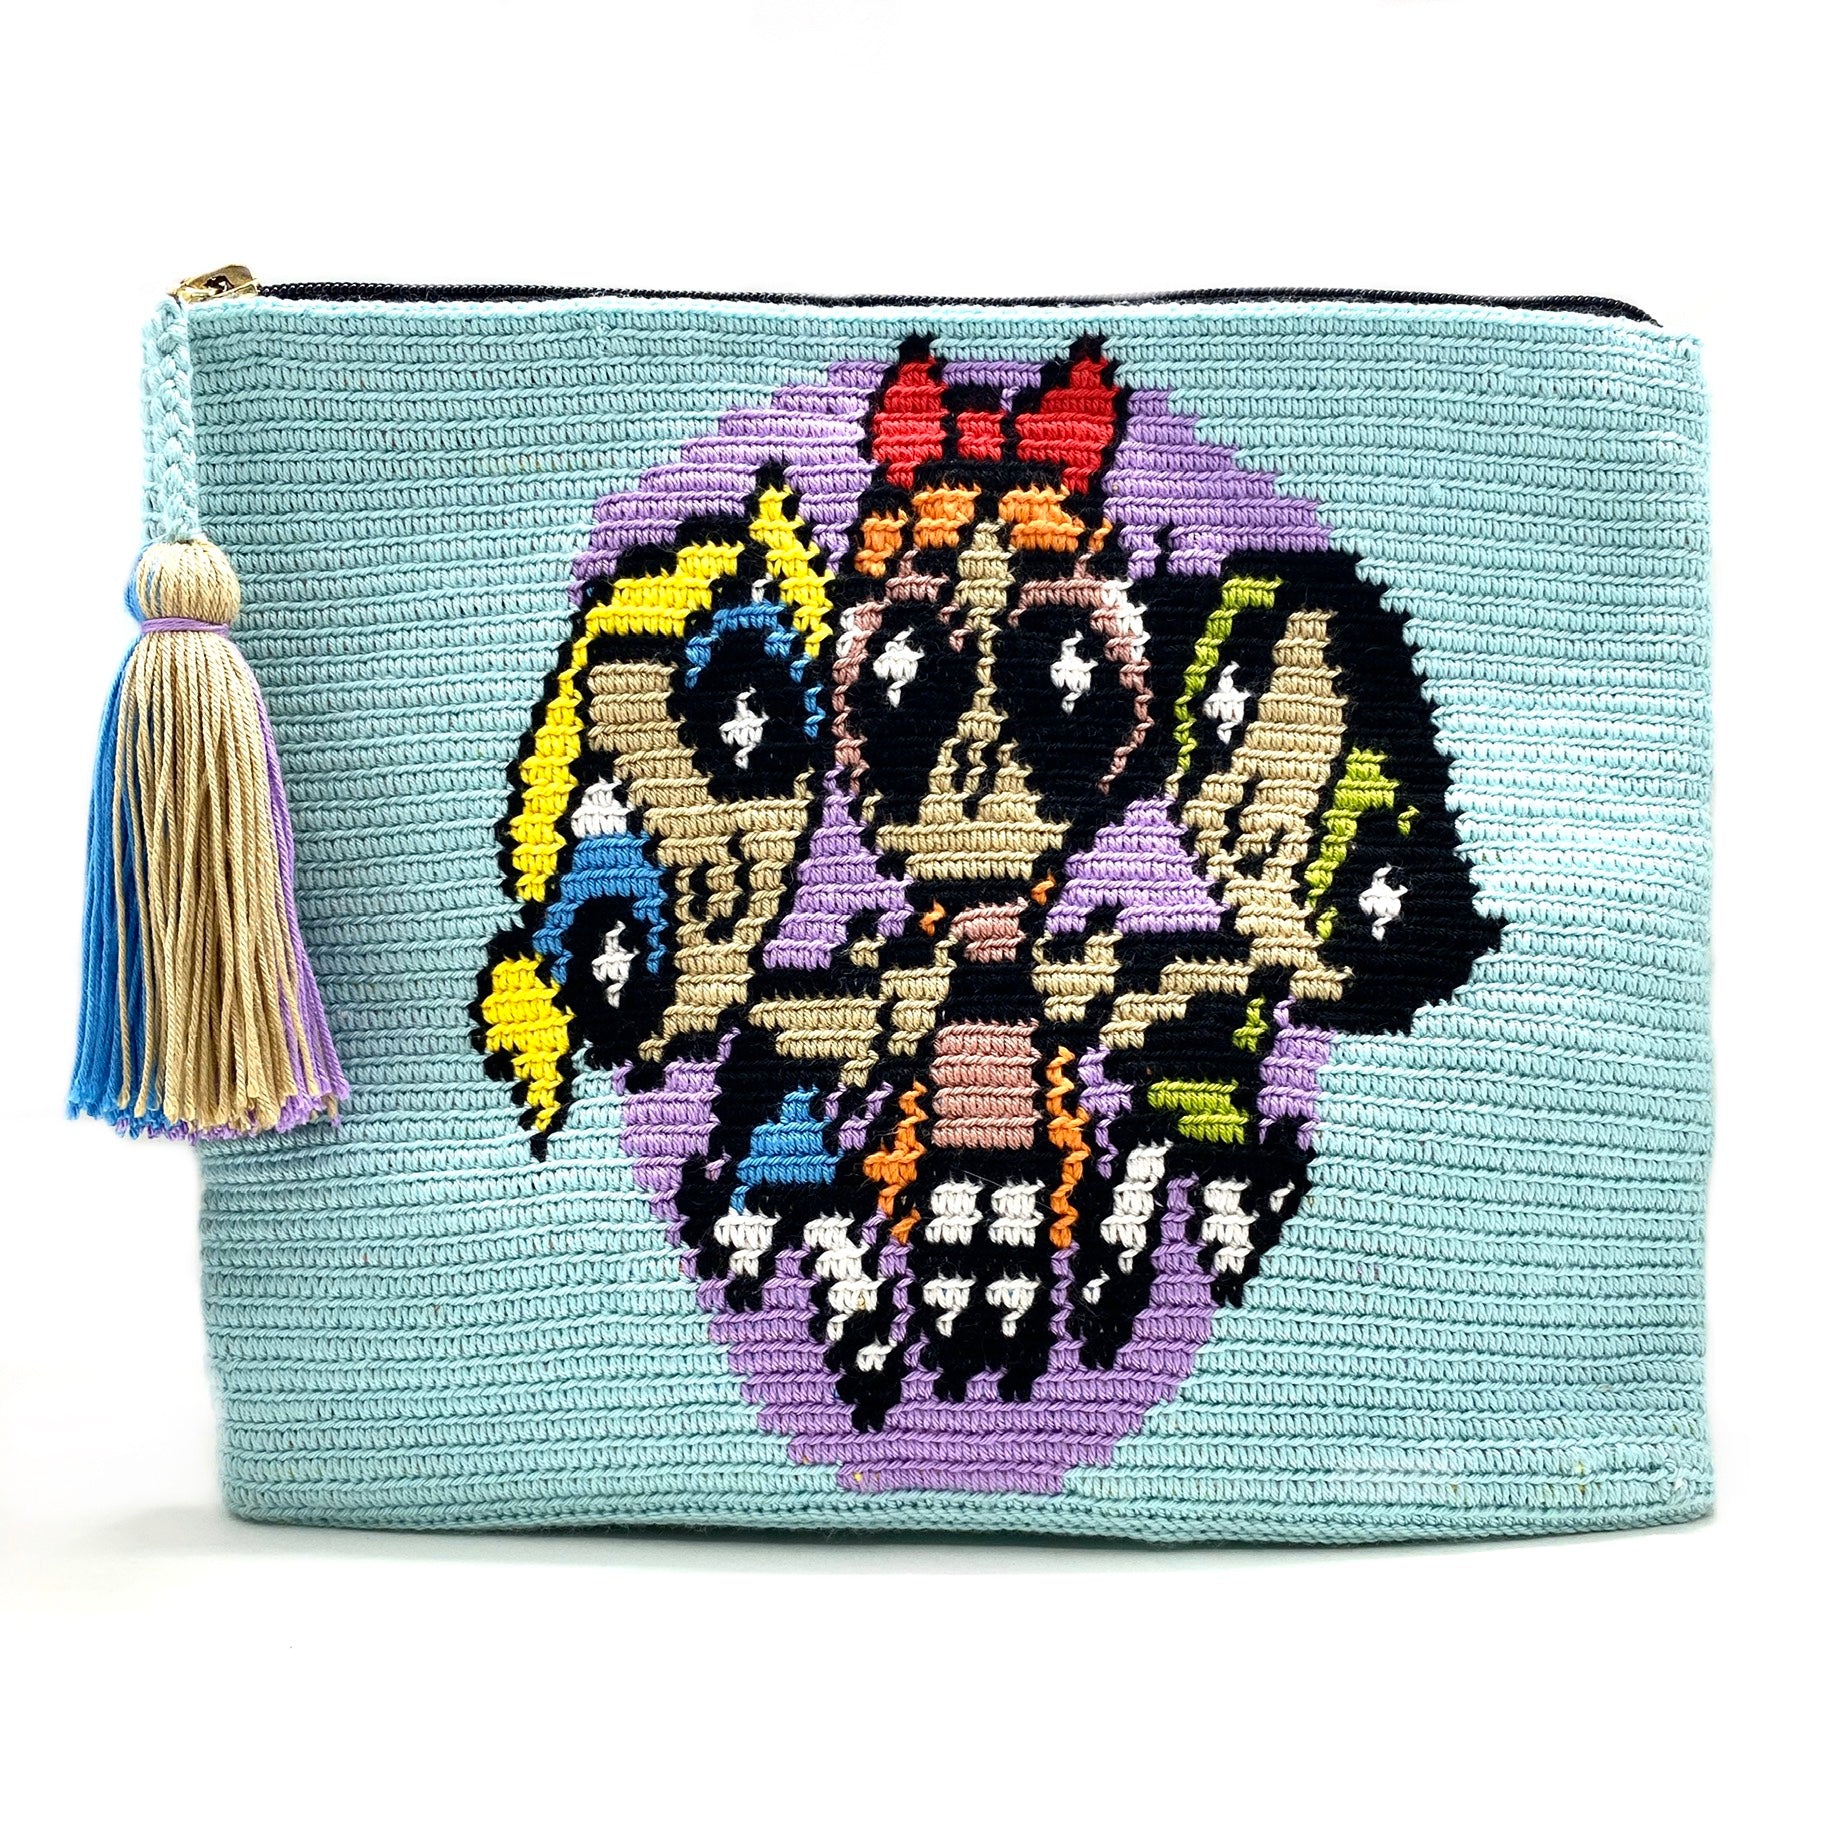 Power puff clutch, lavender circle, sky blue body with tassel.